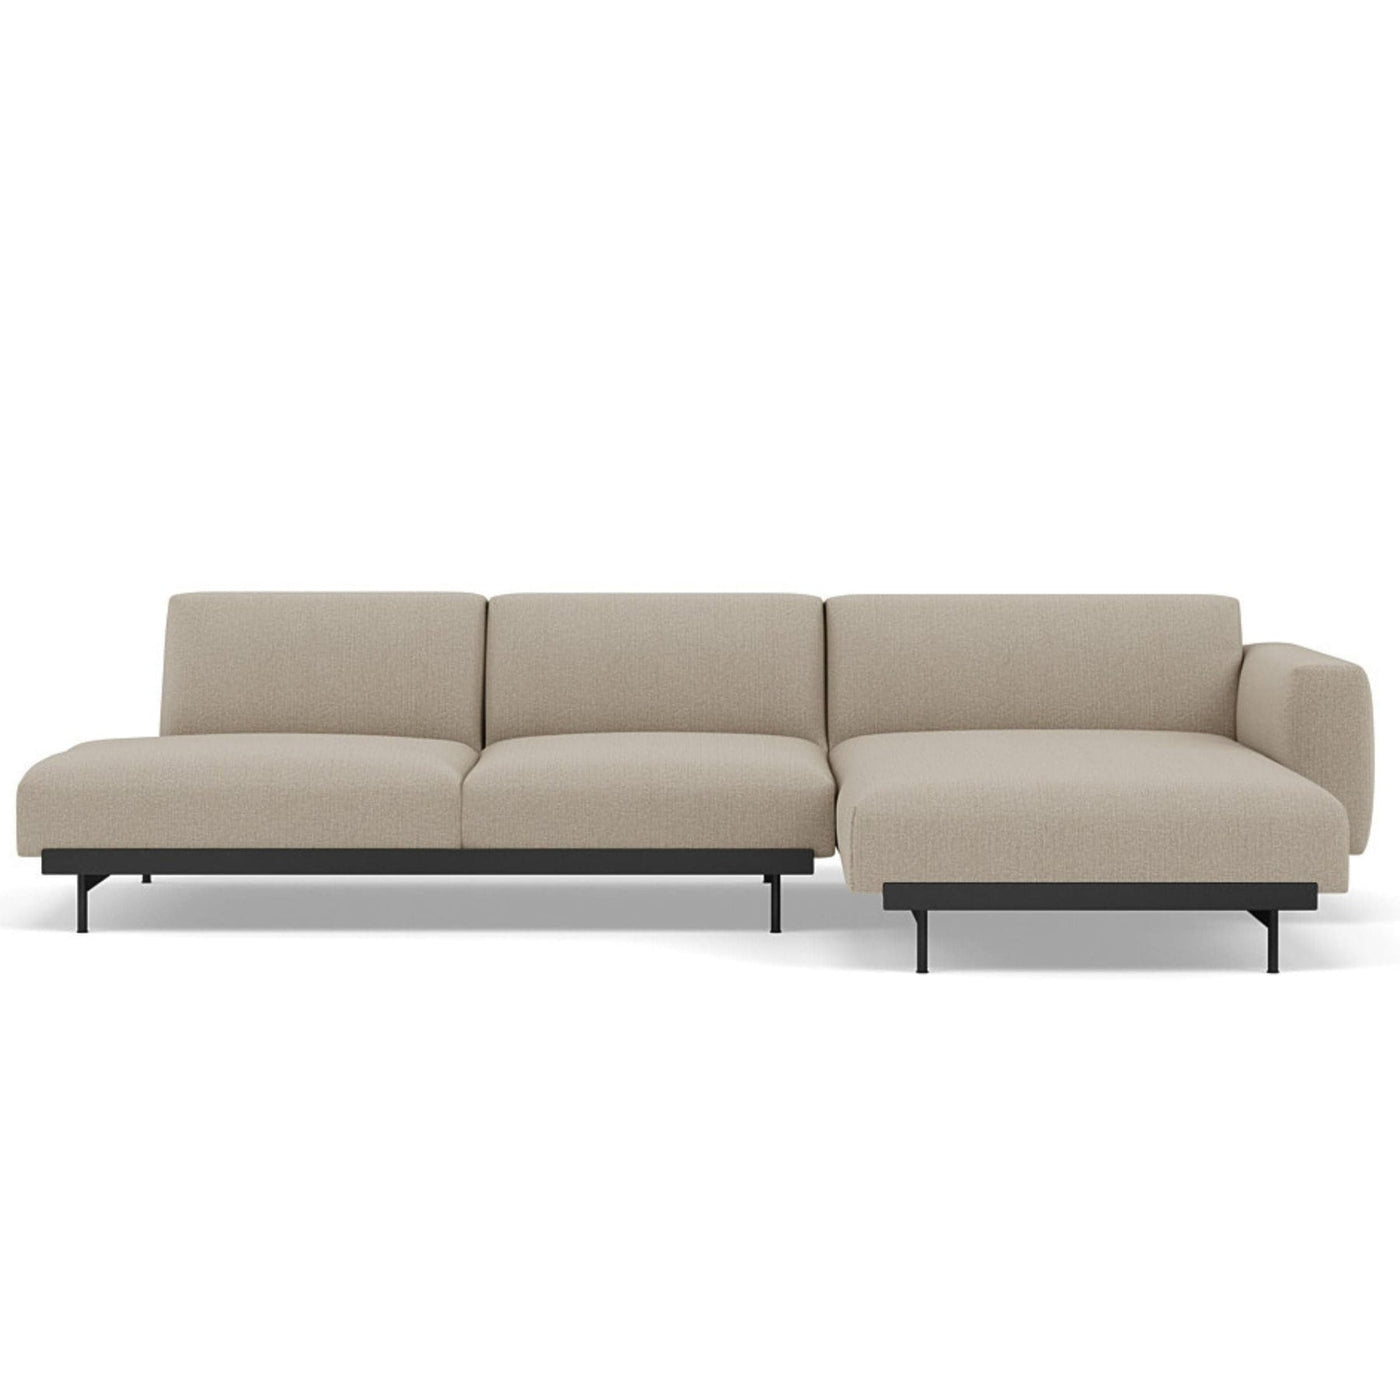 Muuto In Situ Modular 3 Seater Sofa, configuration 9. Made to order from someday designs. #colour_clay-10